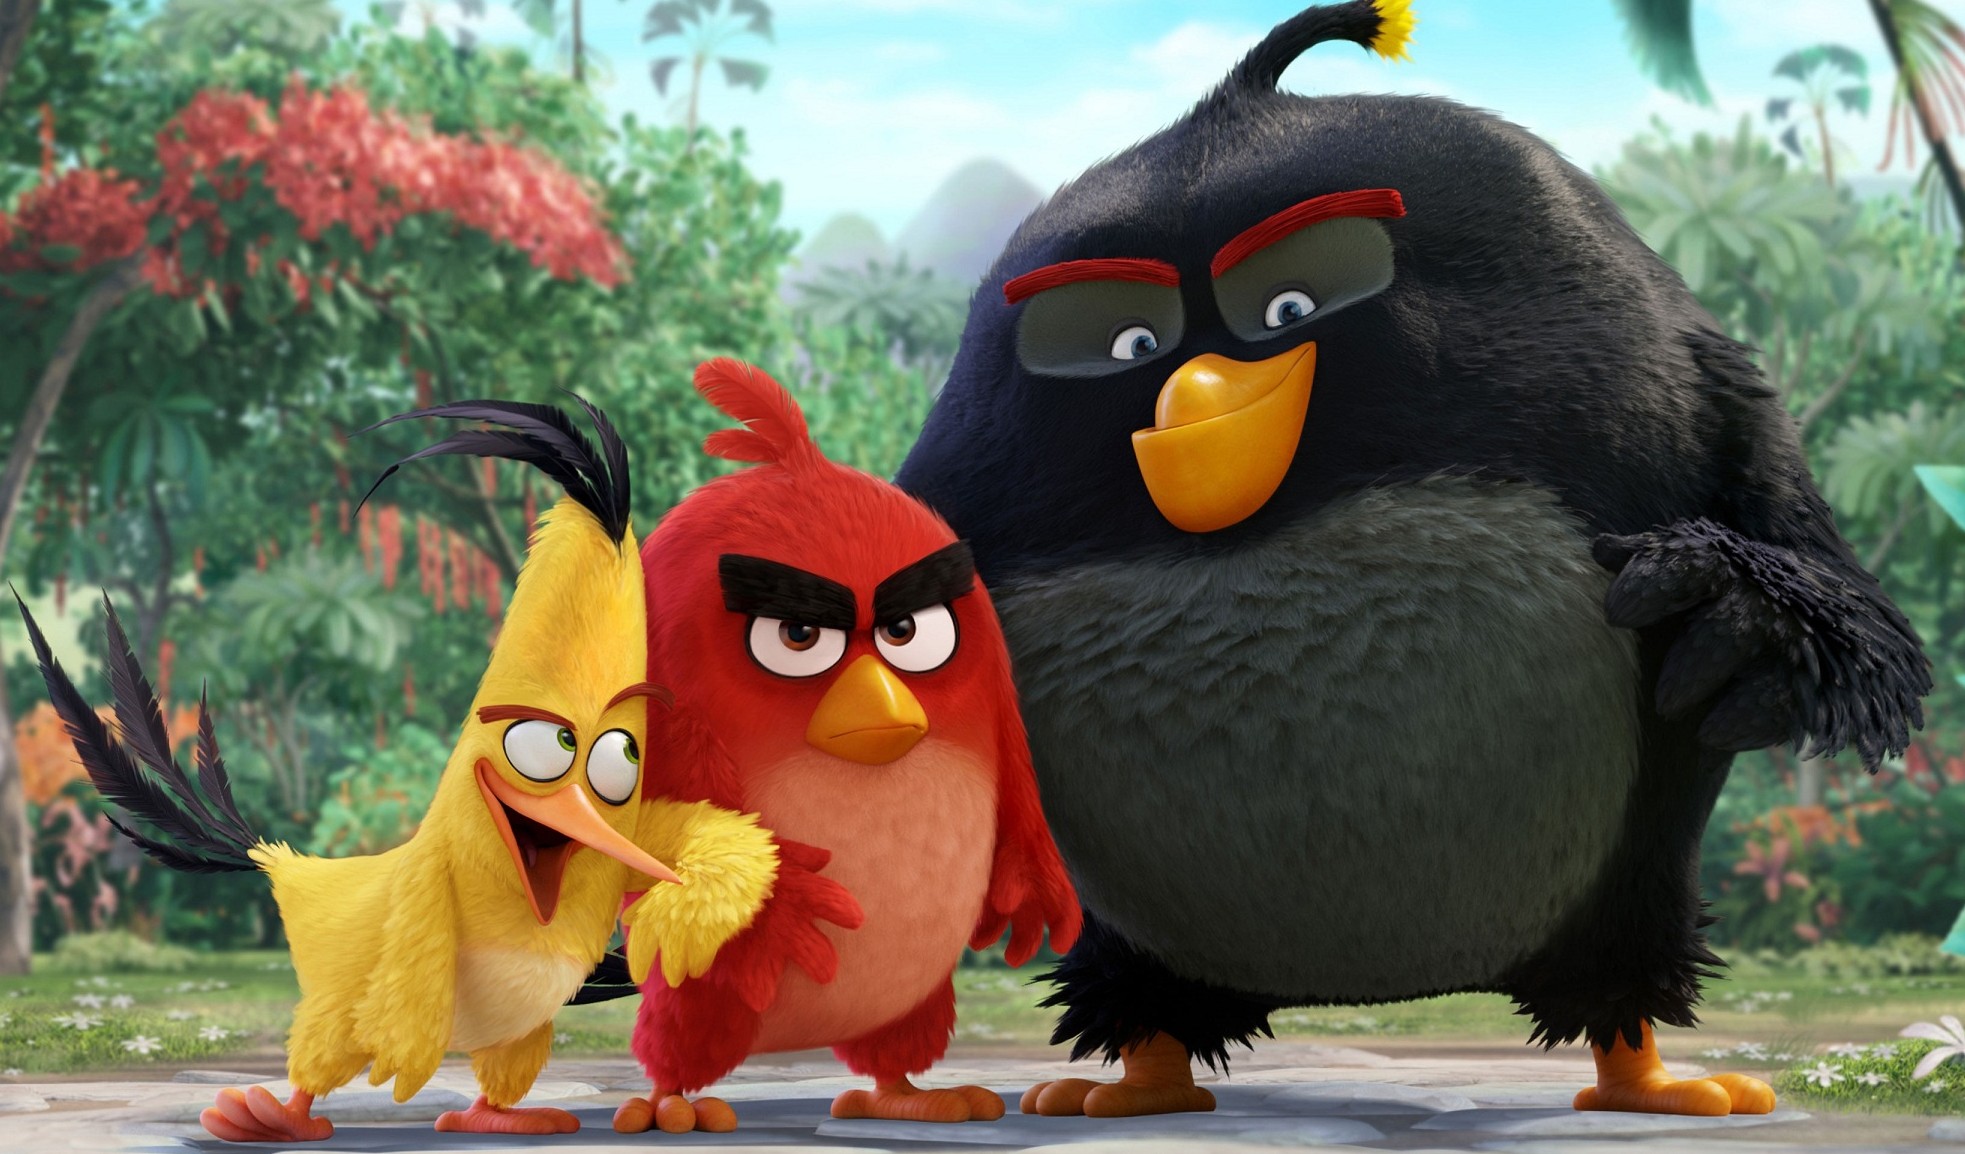 Angry-Birds-Movie-Coming-Summer-2016-Teaser-Image